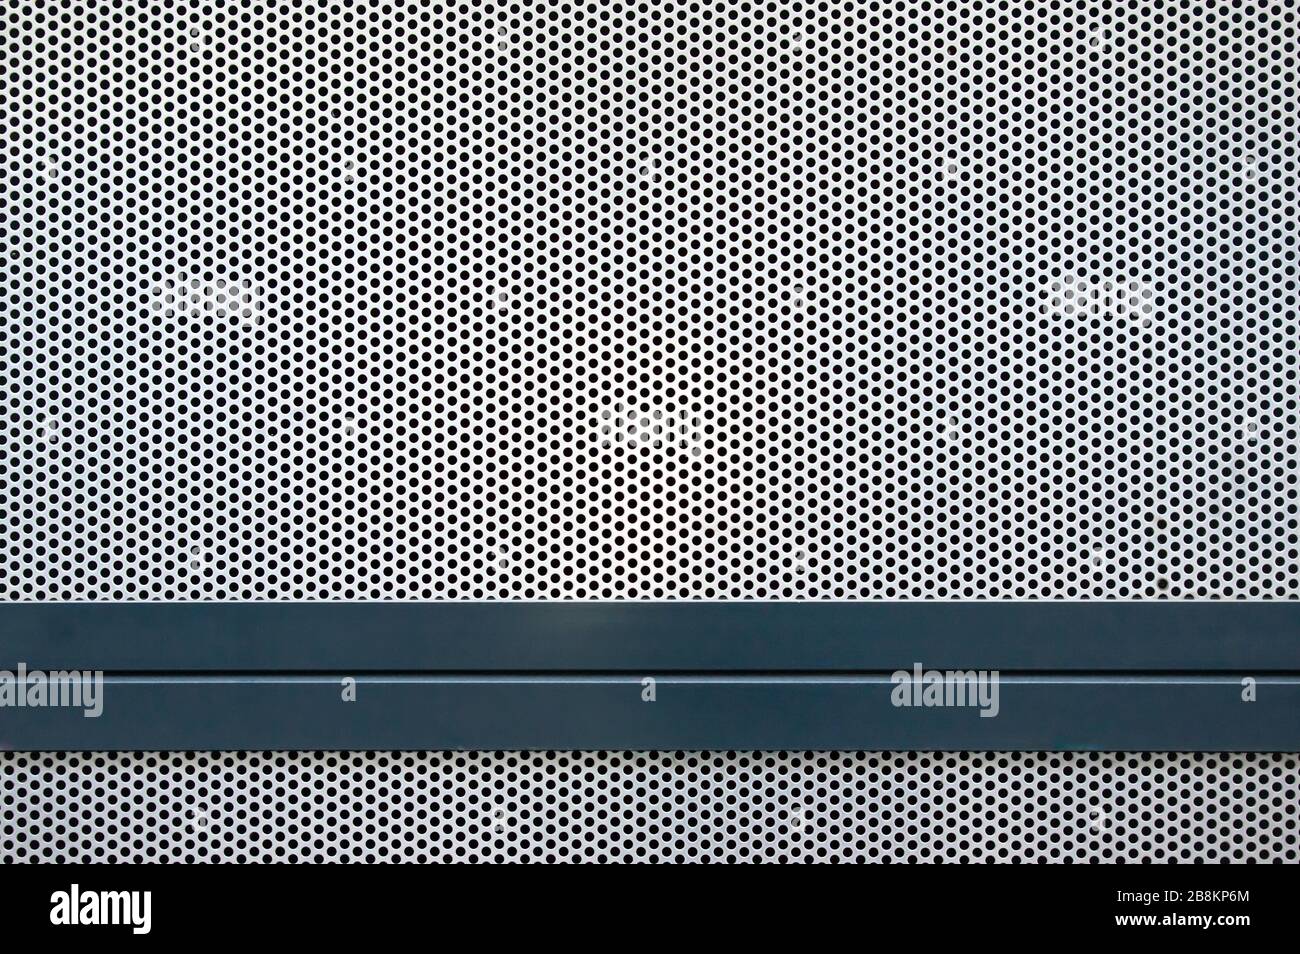 Section of a cover made of several plates of silver perforated plate, which are bordered with blue painted metal profiles Stock Photo